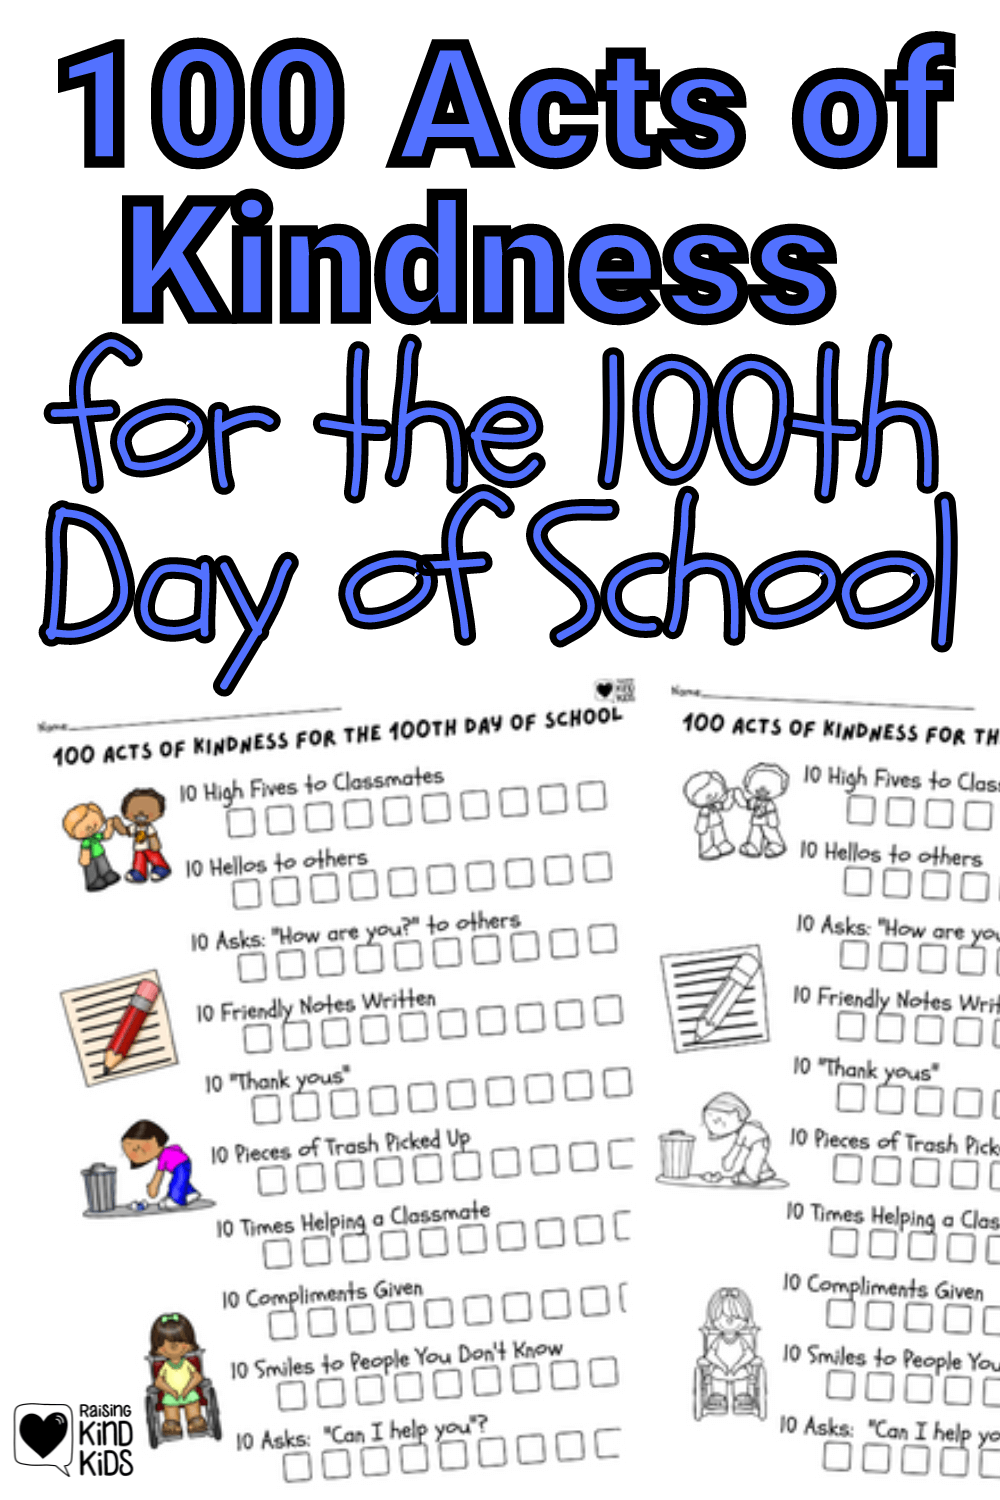 Celebrate the 100th Day of School with these 100 acts of kindness perfect for students to complete in a day.